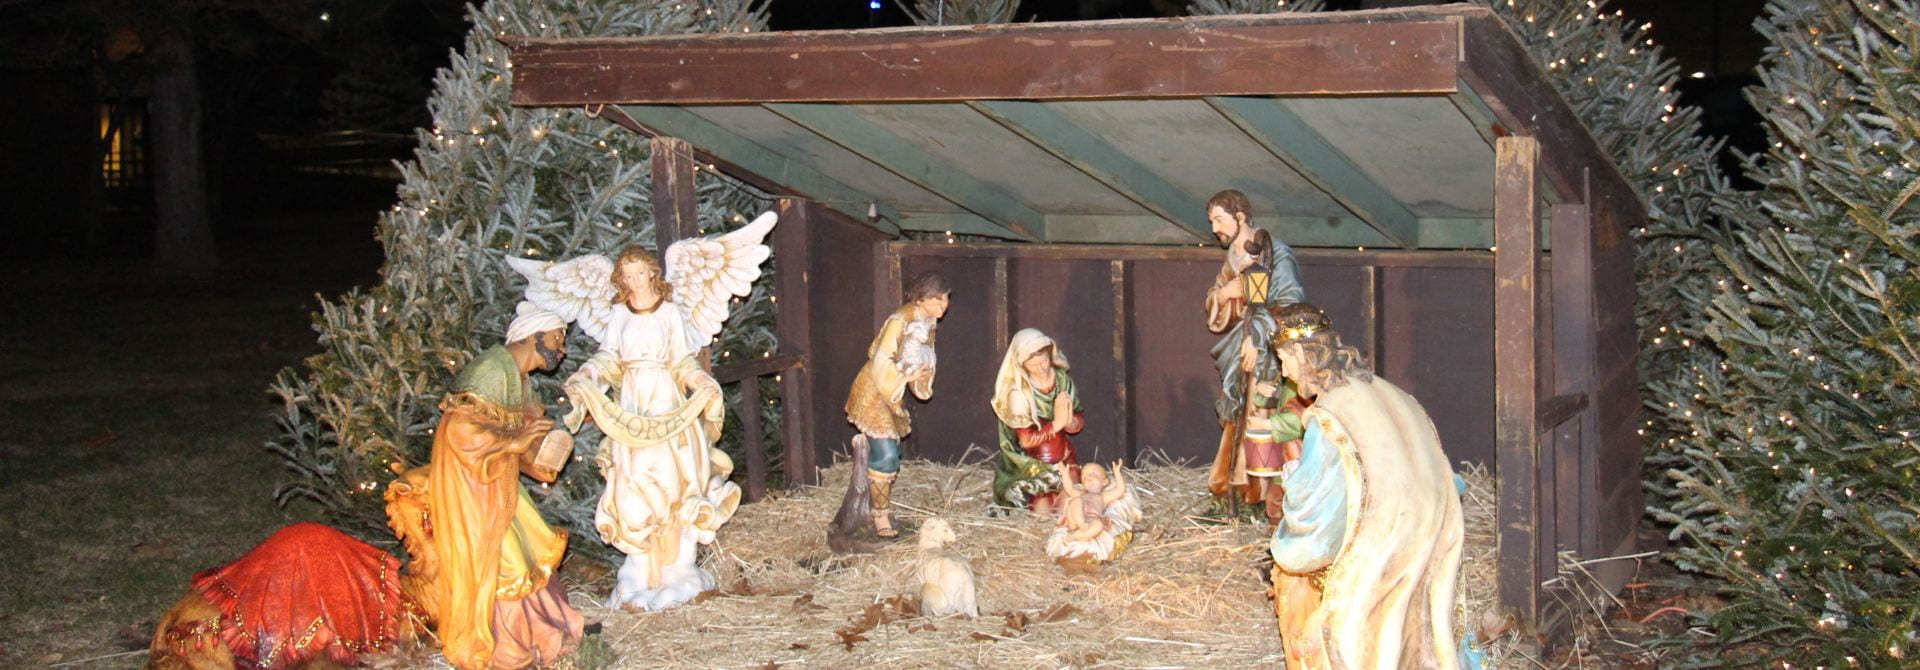 Manger Scene with Ceramic Statues and Lighted Trees.